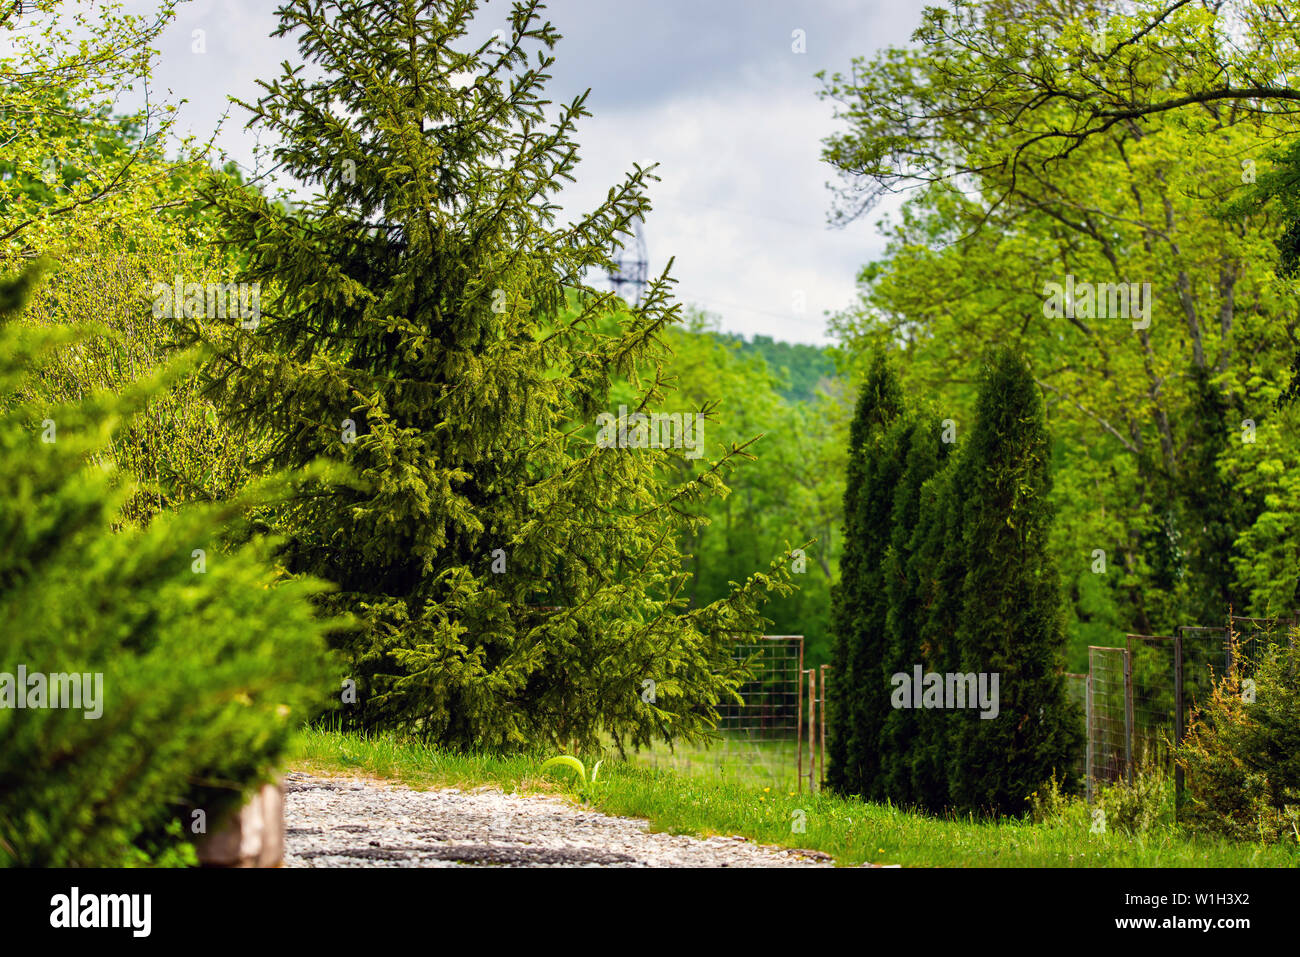 Lonely spruce or Picea pungens Glauca or Christmas tree in the garden. Stock Photo